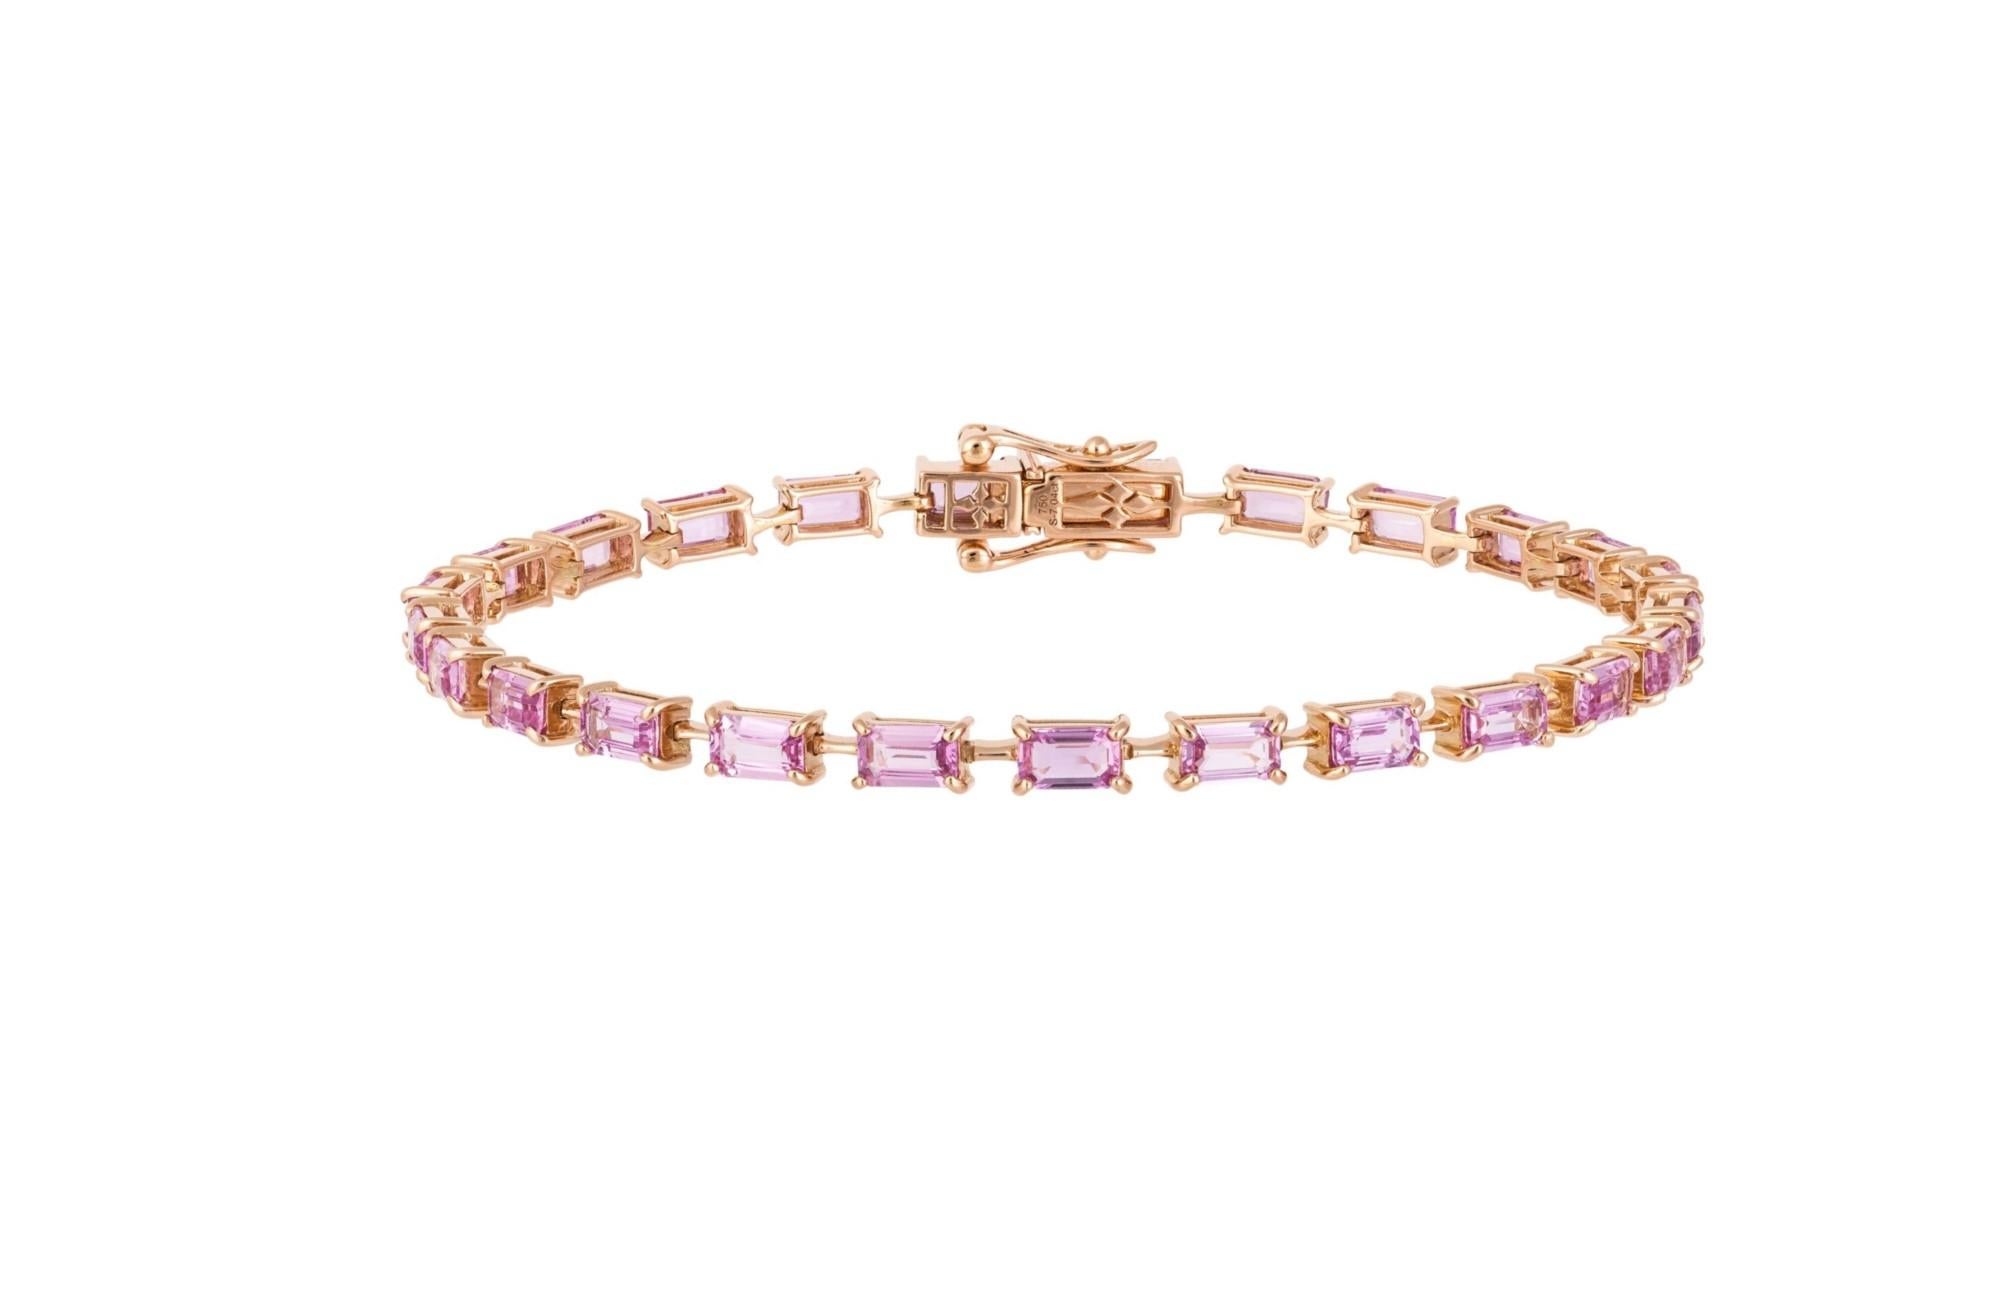 The Following Item we are offering is this Rare Important Radiant 18KT Gold Gorgeous Glittering and Sparkling Magnificent Fancy Emerald Cut Pink Sapphire Tennis Bracelet. Bracelet Contains approx 8.50CTS of Beautiful Fancy Emerald Cut Pink